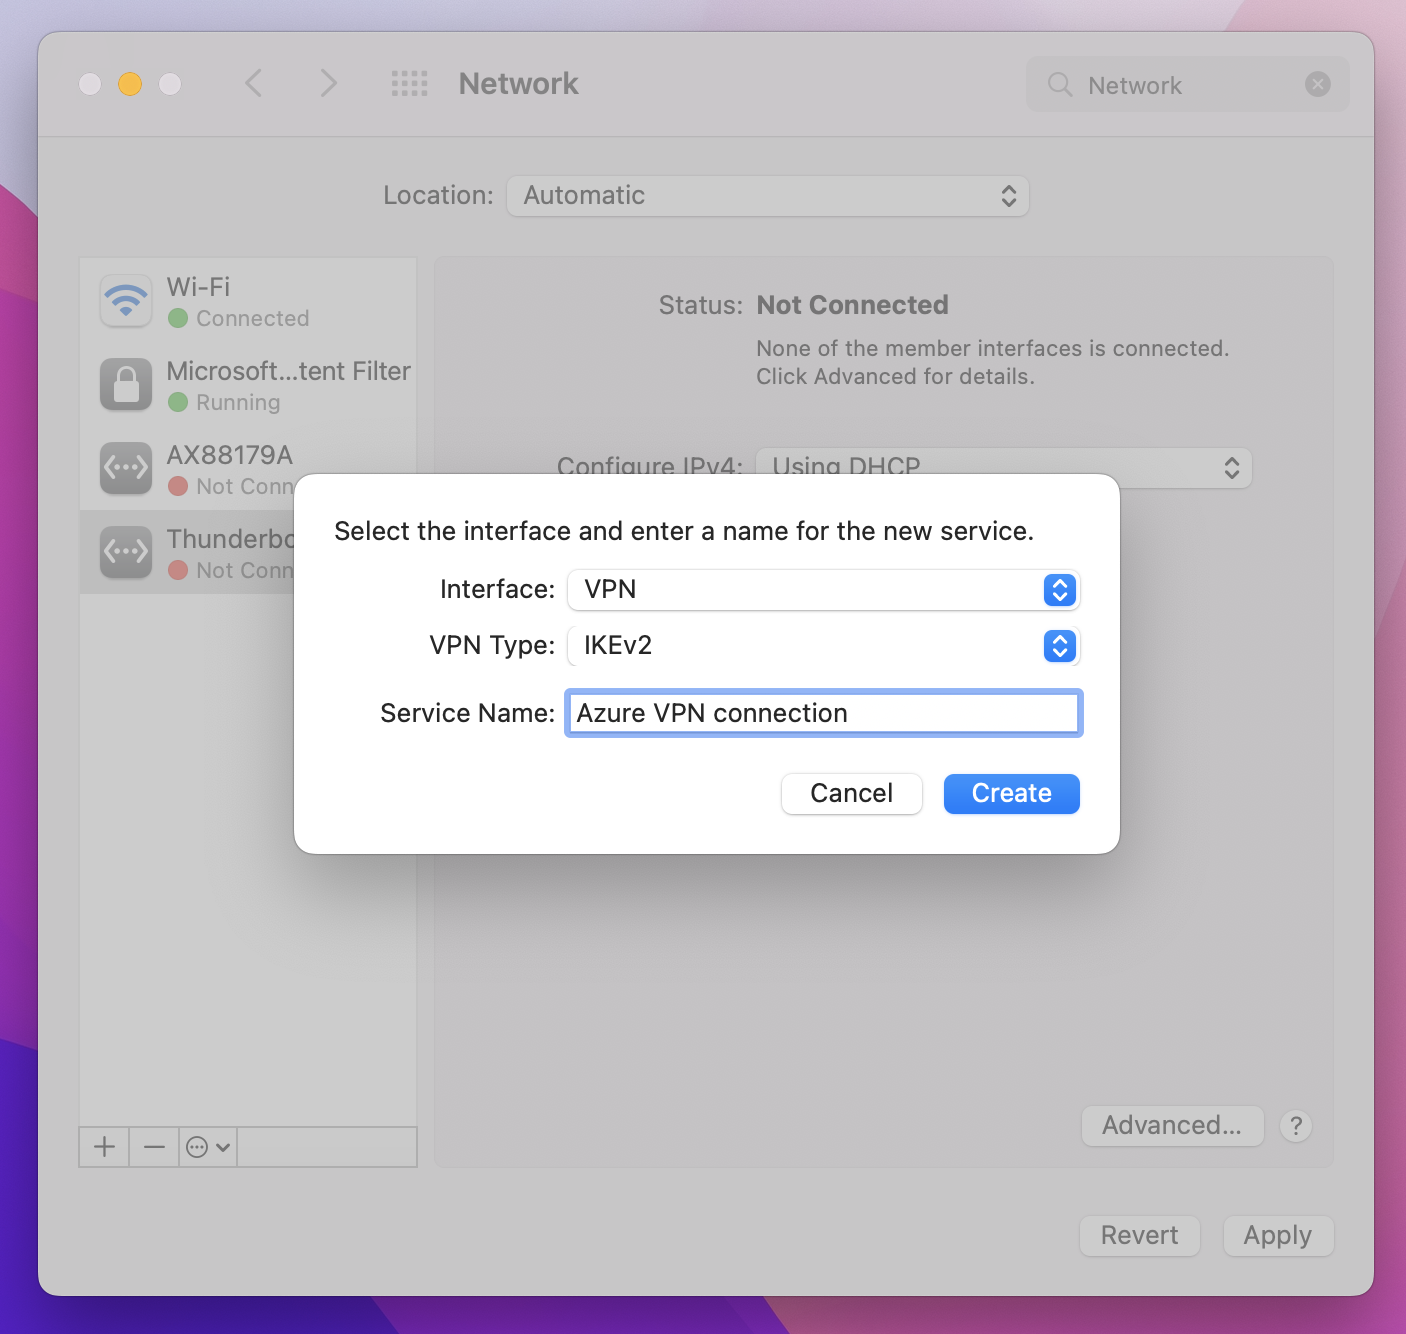 Screenshot shows the Network window with the option to select an interface, select VPN type, and enter a service name.